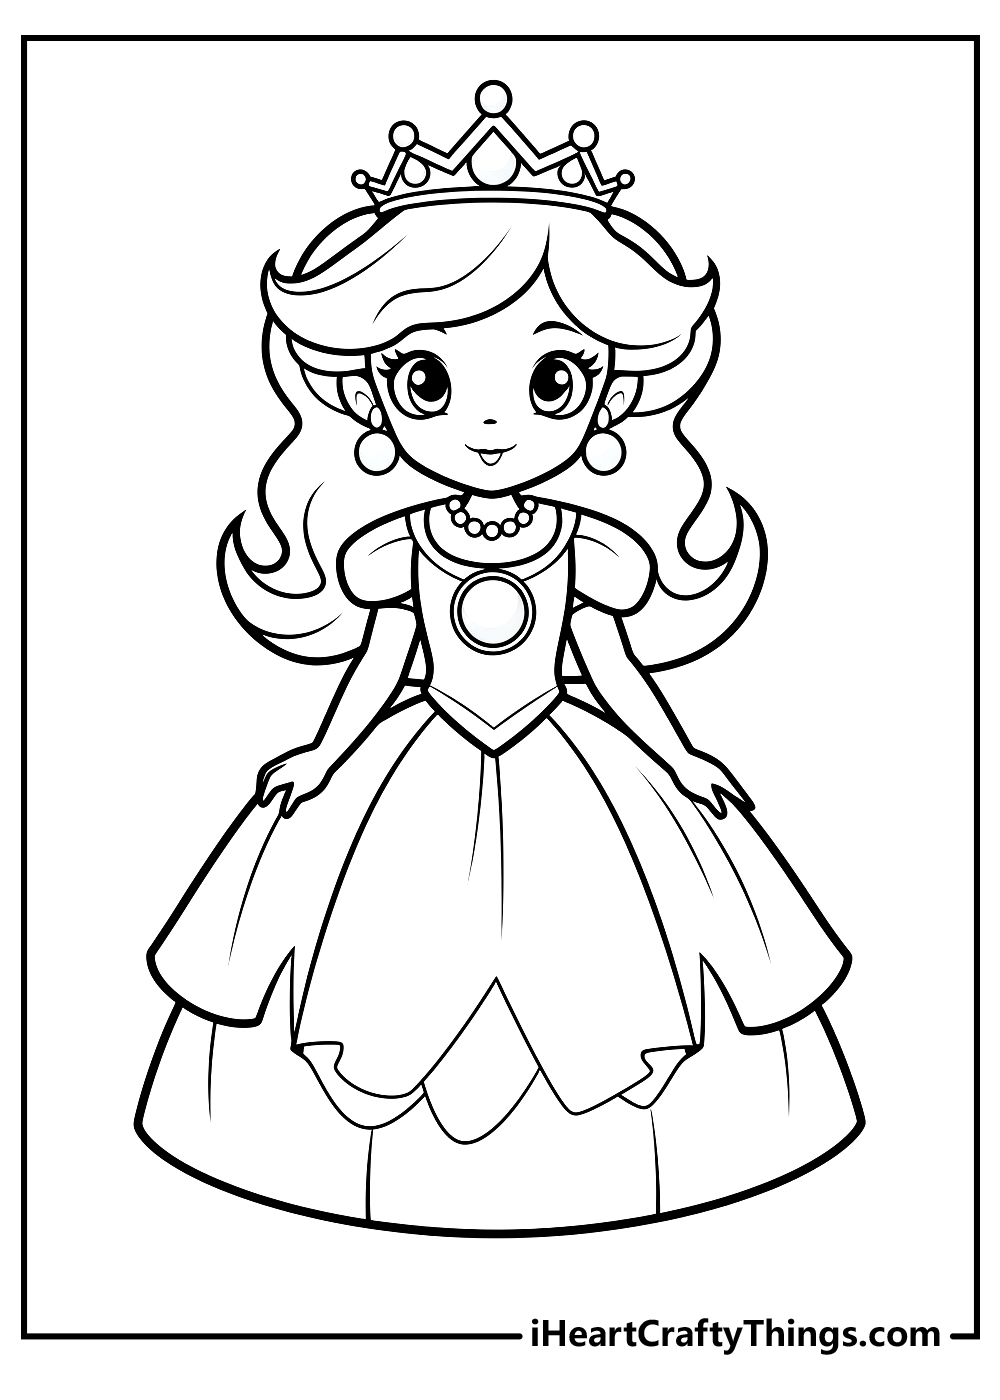 black-and-white princess peach coloring pages